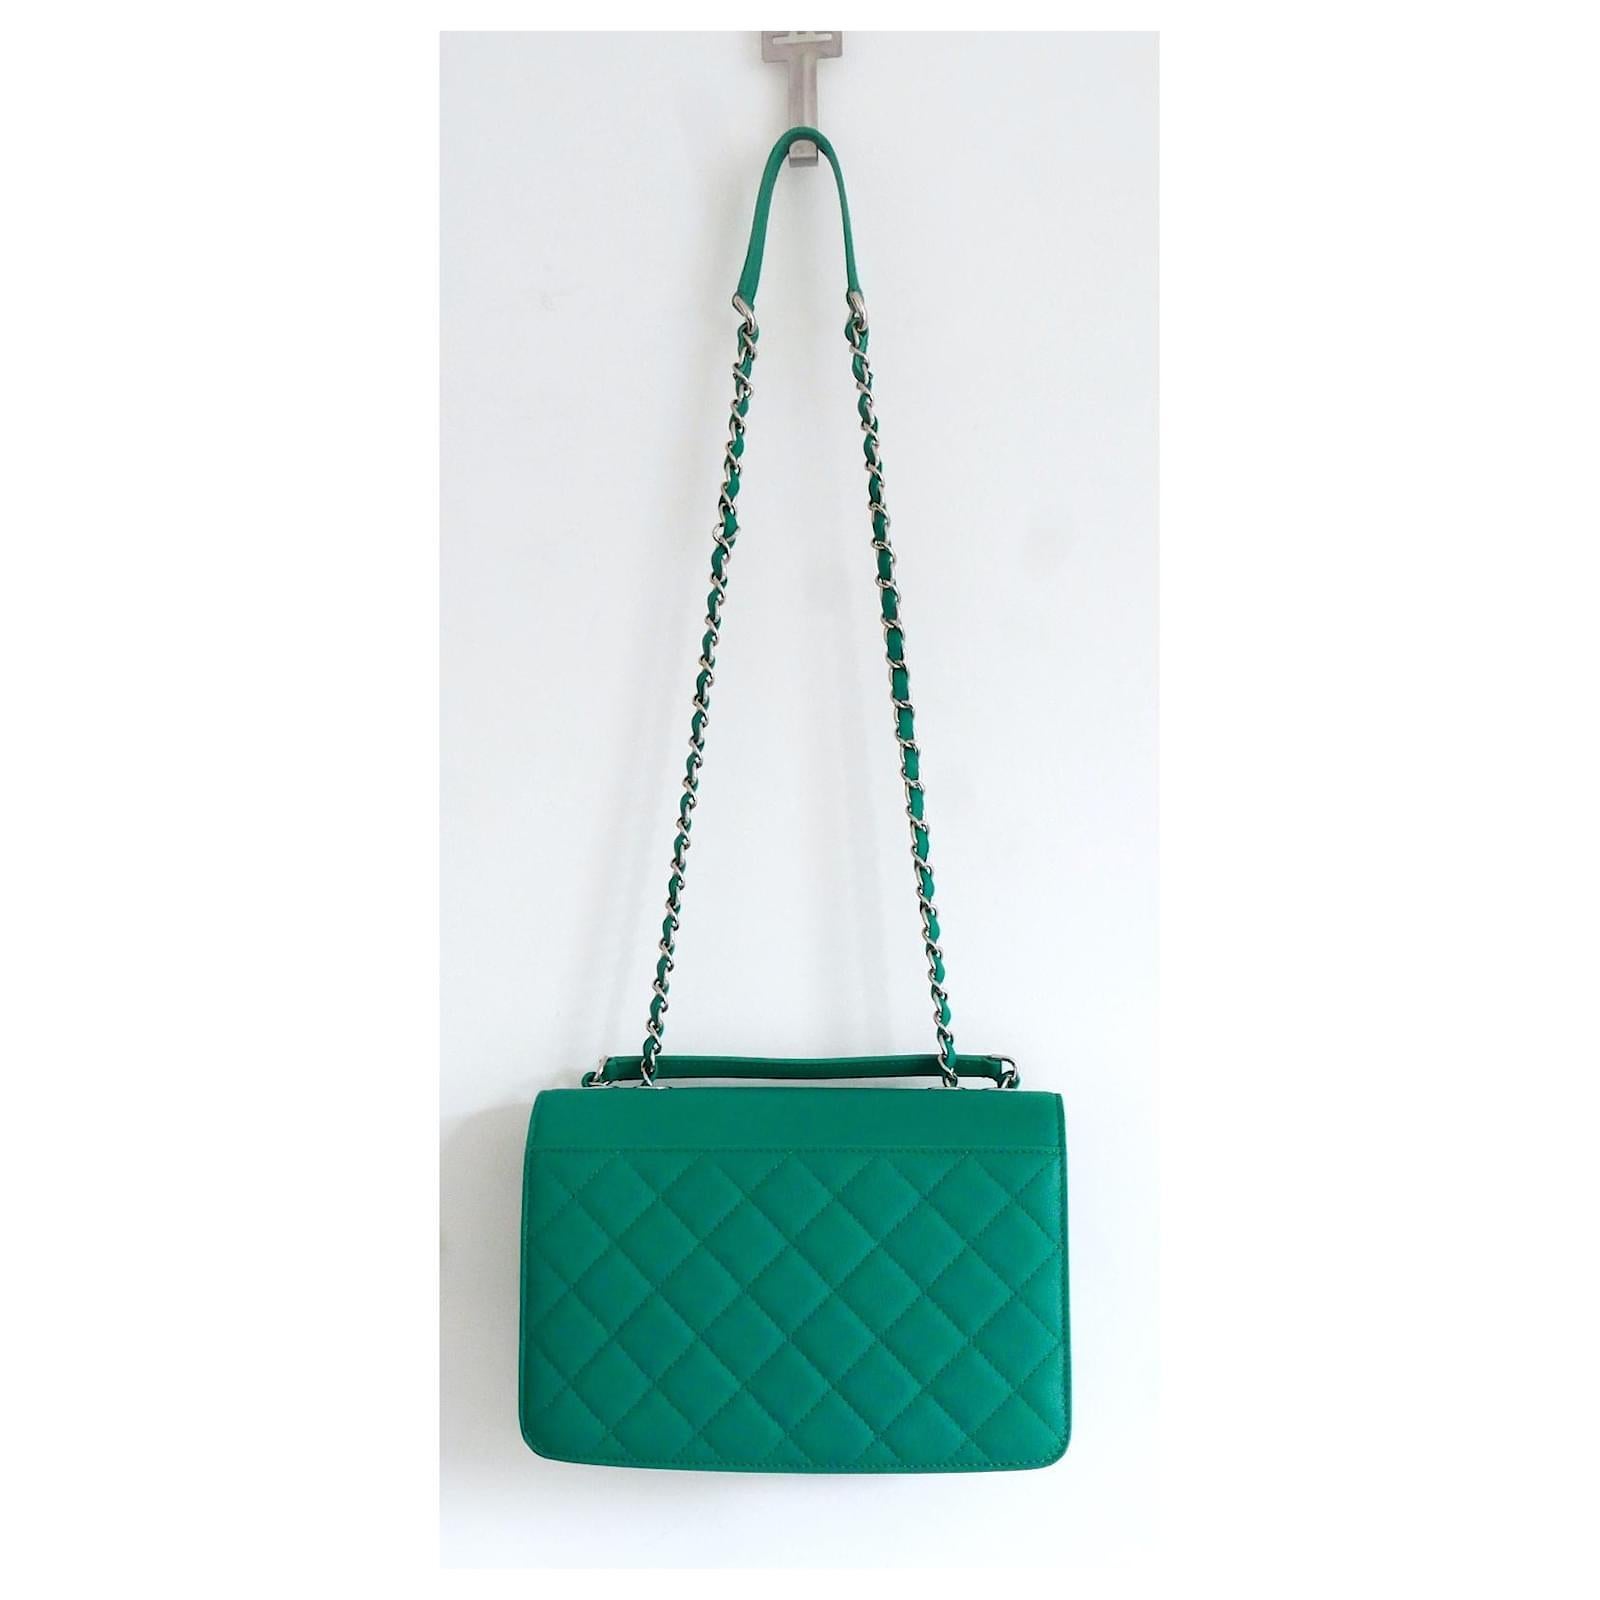 Absolutely stunning Chanel Mini Urban Companion Flap Bag. Unworn with dustbag and authenticity card. Made from bright emerald green grained calf leather with half covered silvertone CC clasp. It has roomy quilted front pocket, concertina sides and